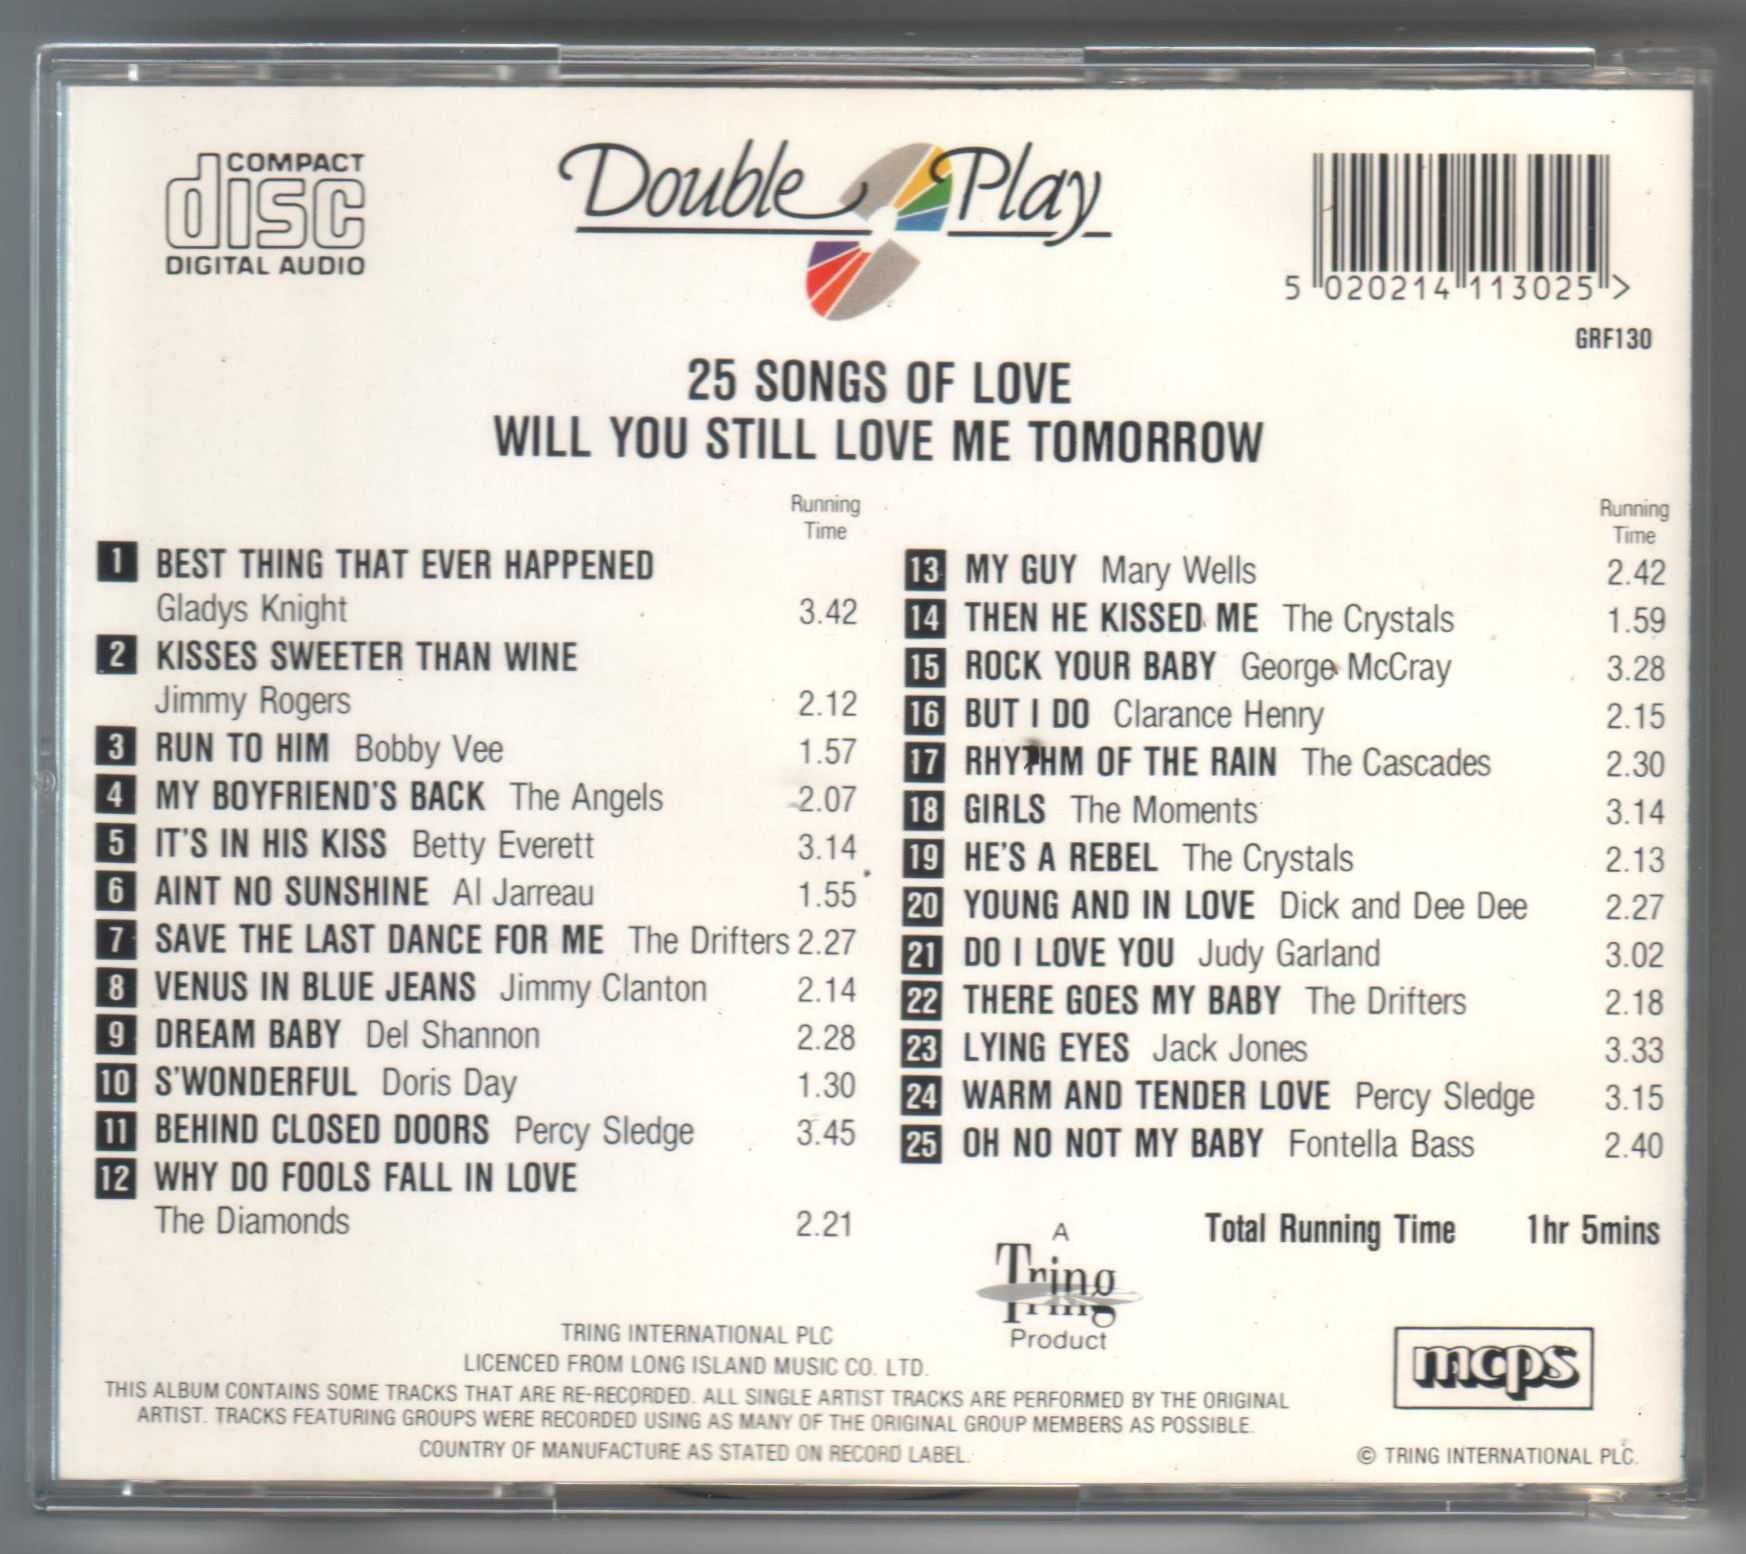 CD 25 Songs of Love - Will You Still Love Me Tomorrow